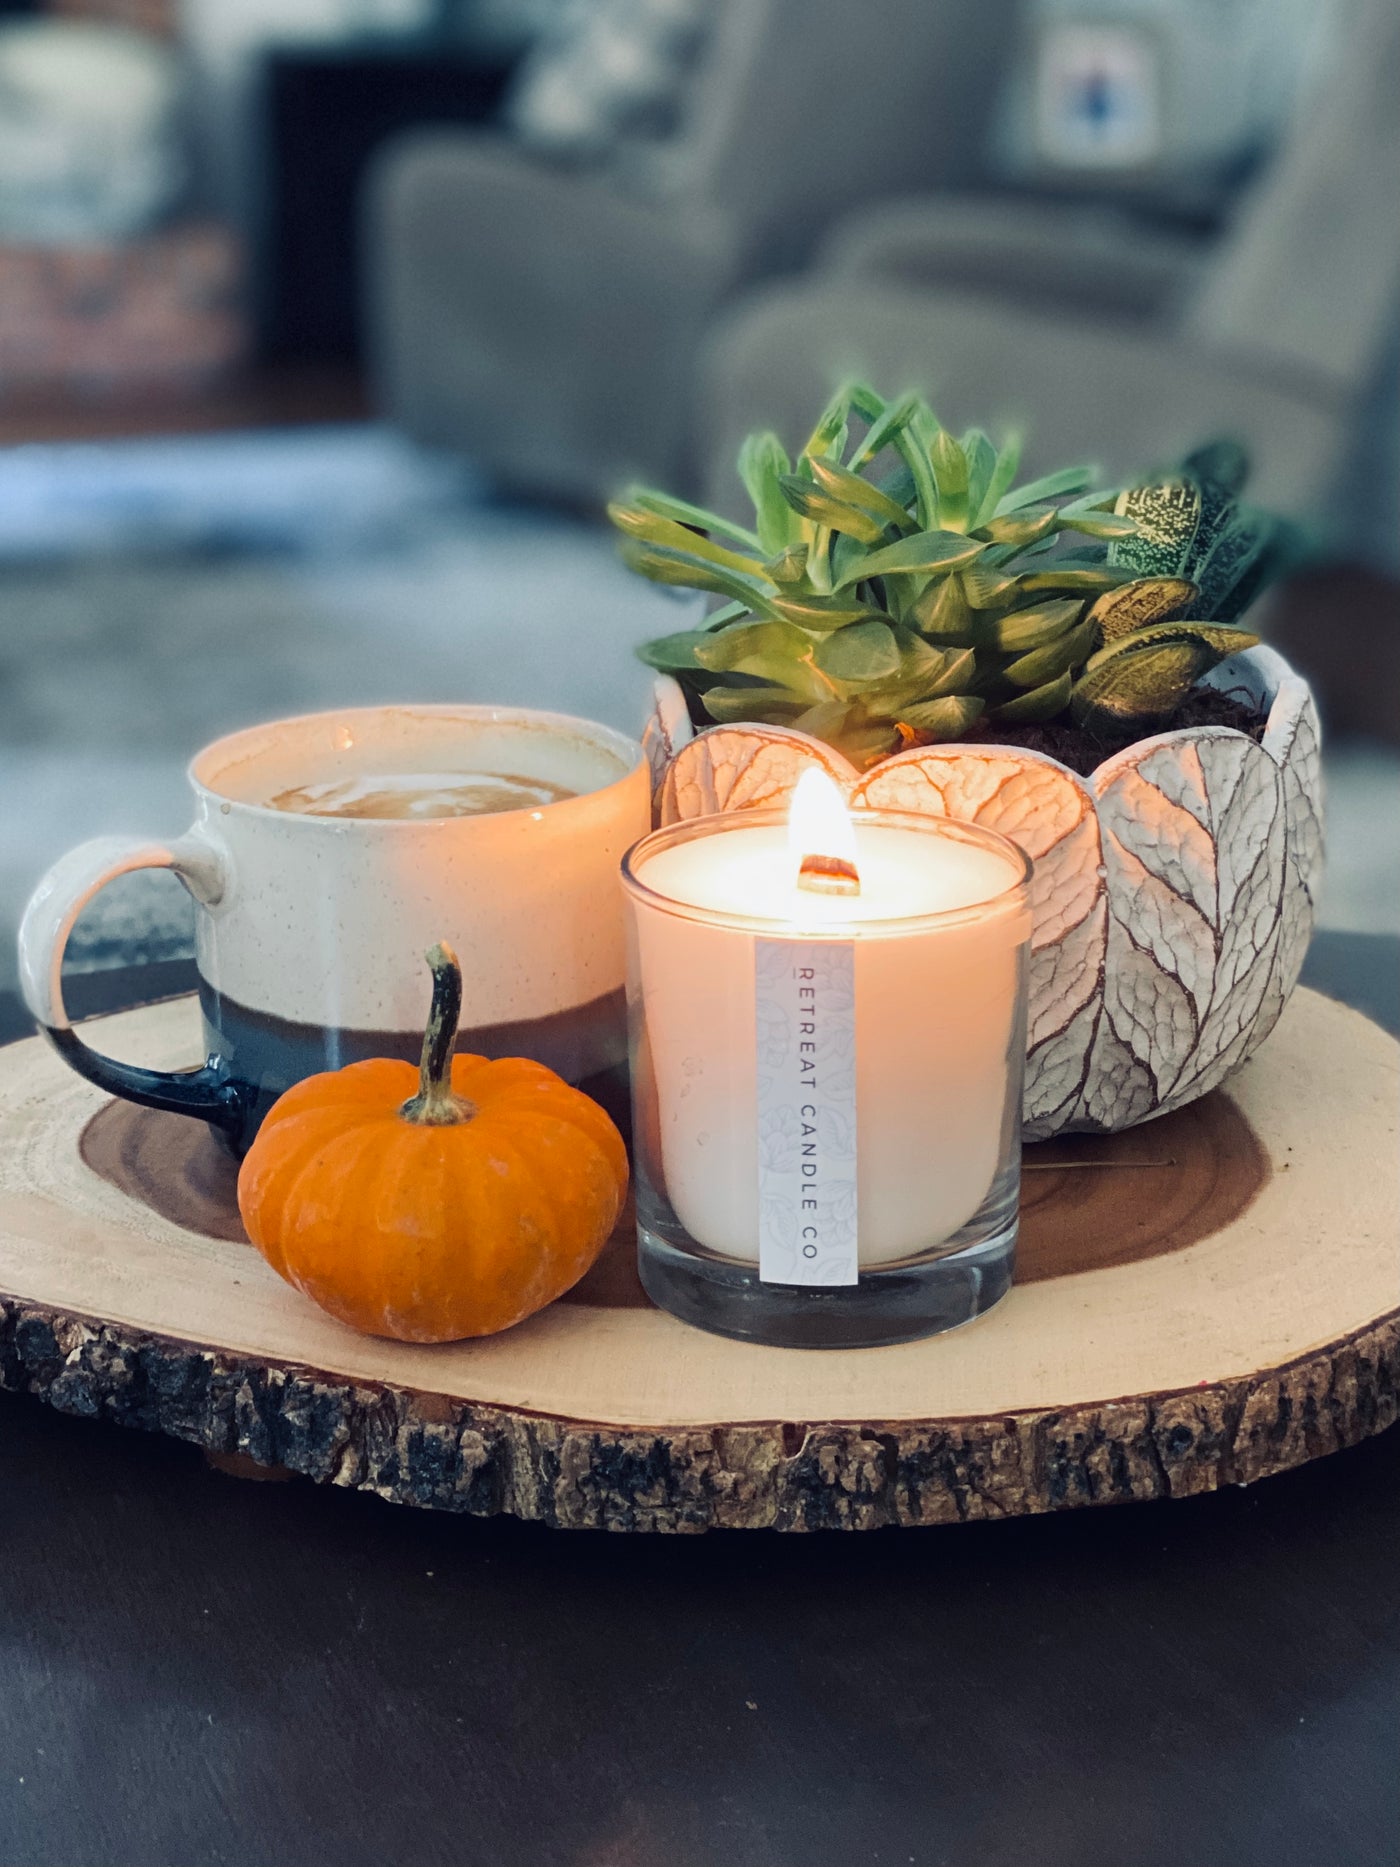 Clove Candle - #CandlesForACause - Partial proceeds of this candle gives back to kids mental health. Vegan. All-natural soy and coconut wax. Phthalate-free fragrances. Crackling wooden wick, and a seed paper bookmark to plant in your candle jar after. Feel good about what you buy. 